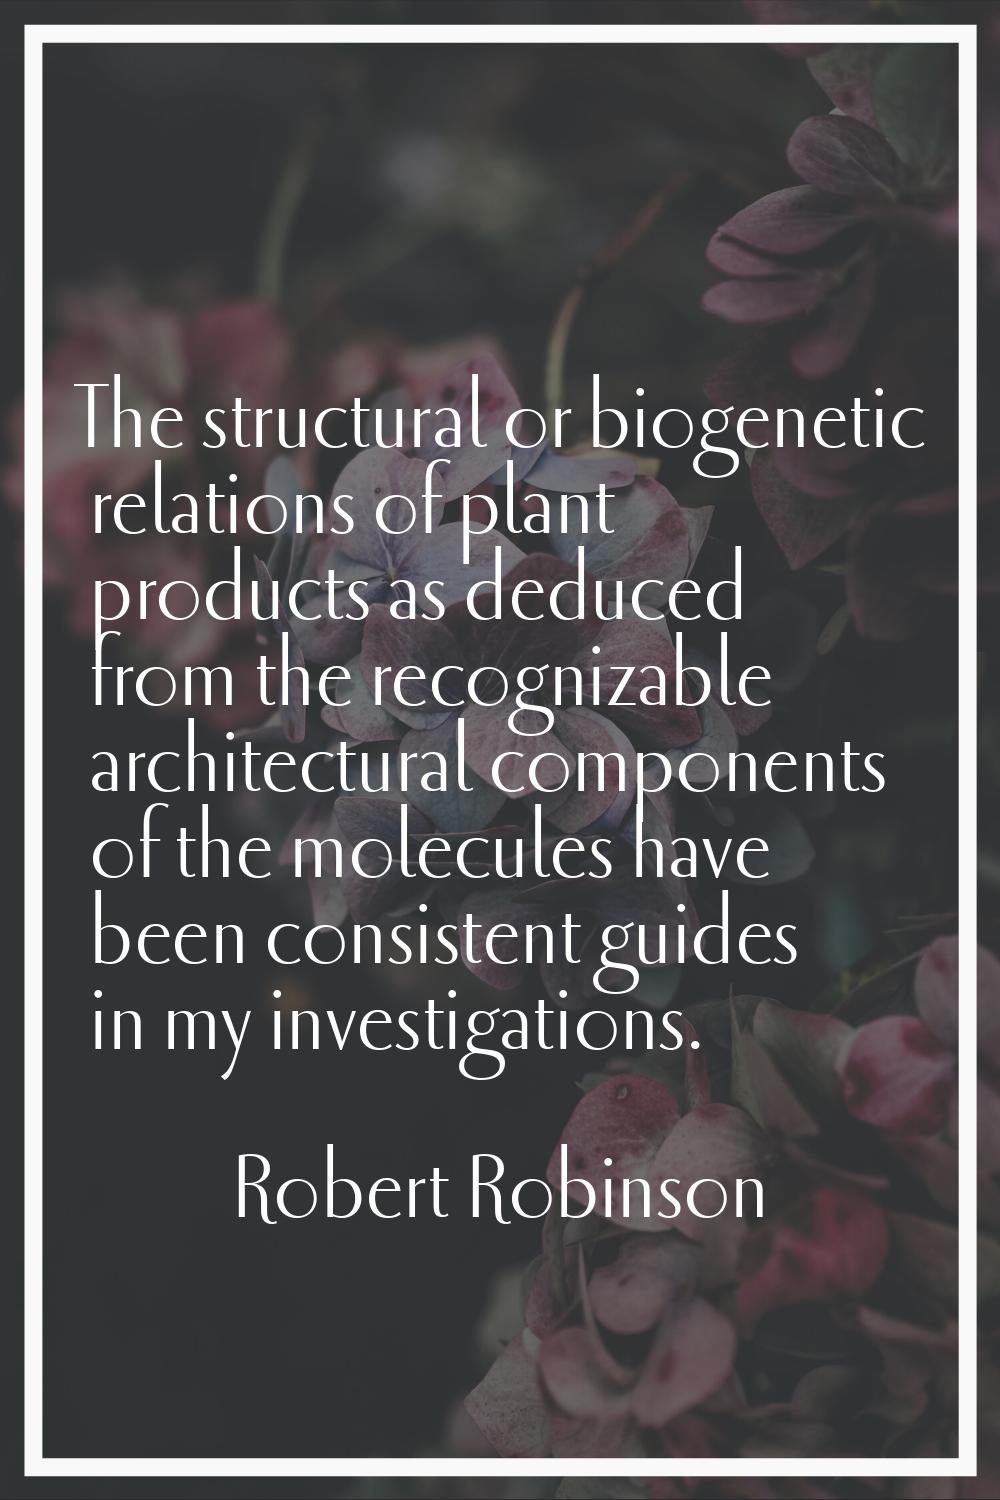 The structural or biogenetic relations of plant products as deduced from the recognizable architect